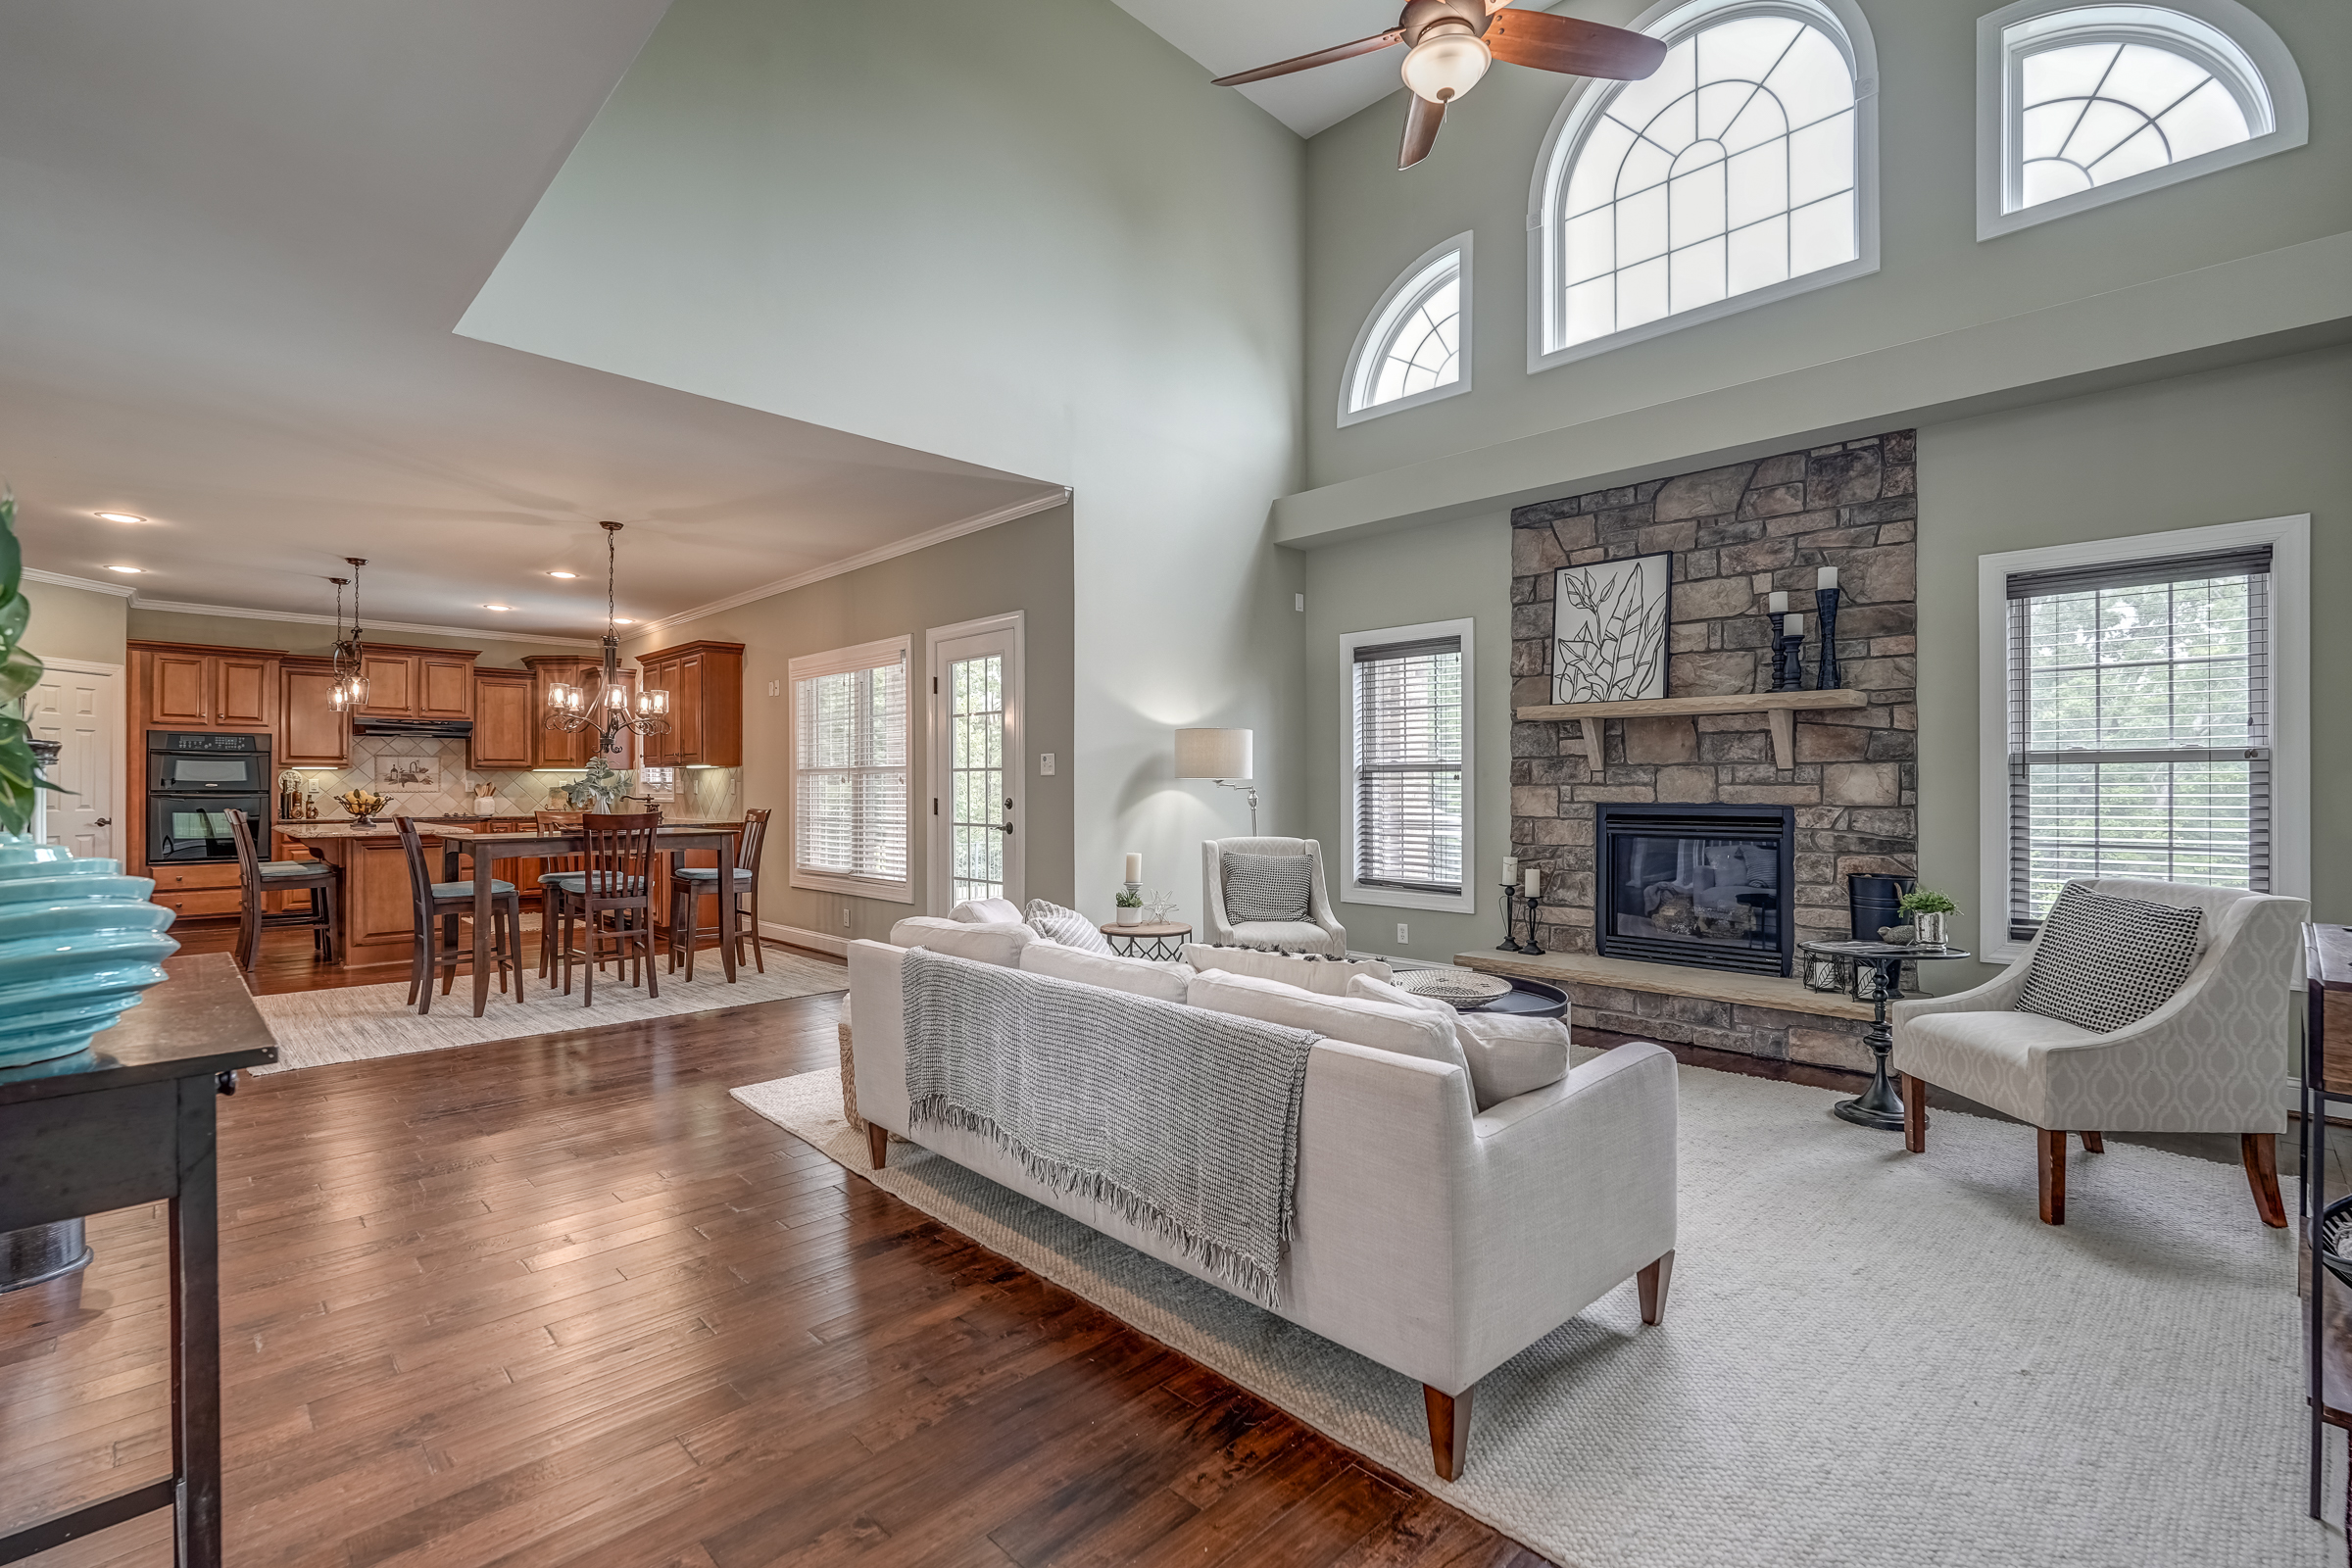 Spacious, open living area with soaring ceilings, stone fireplace, and eat-in gourmet kitchen